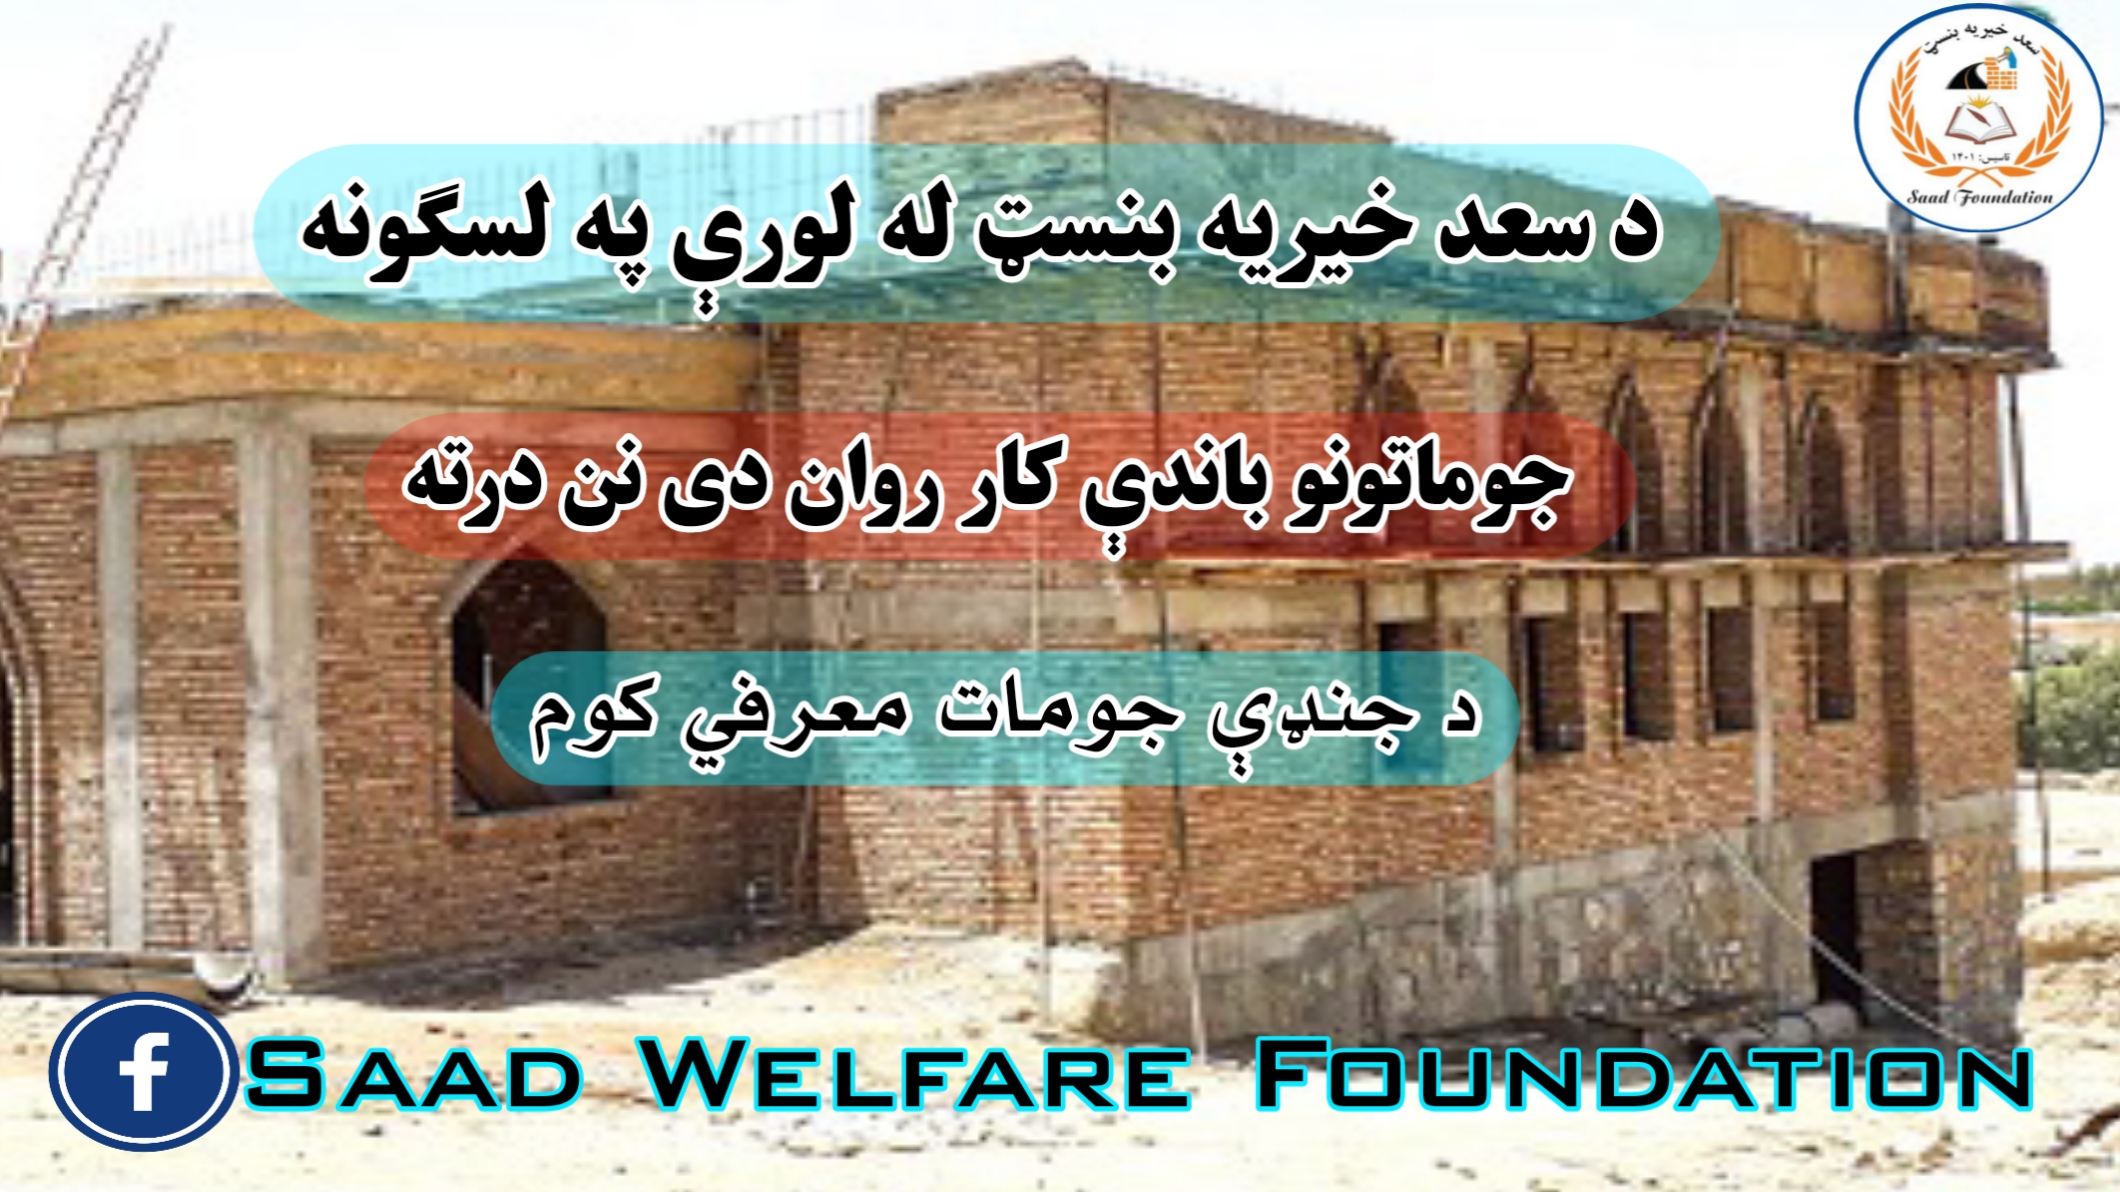 https://saadwelfarefoundation.org/pages/construction_on_masjid_from_saad_welfare_foundation___.php